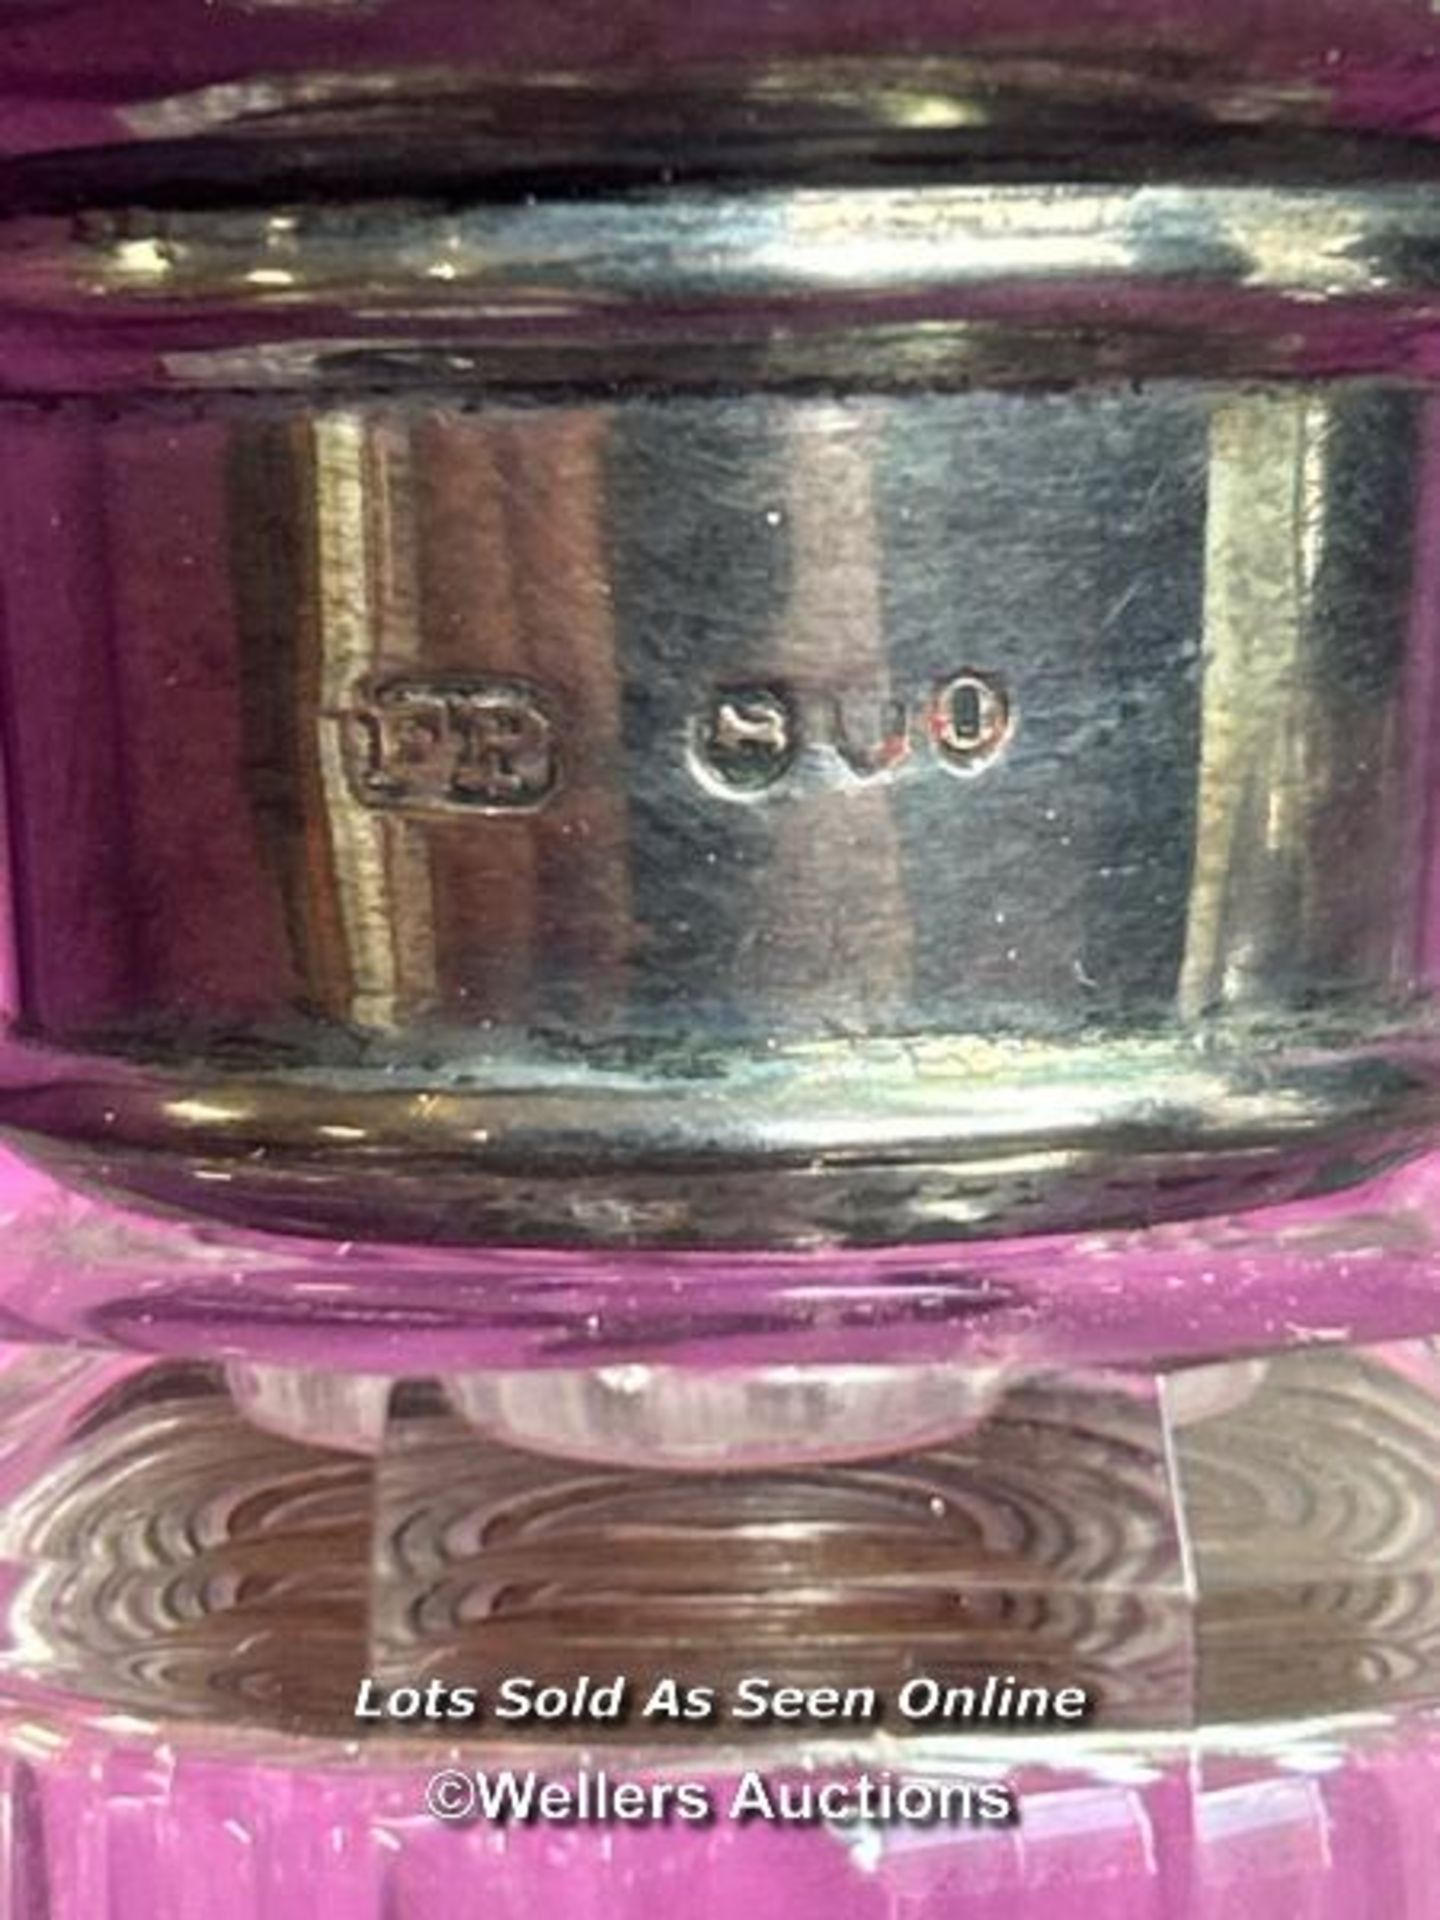 PAIR OF HALLMARKED SILVER TOPPED AND CUT GLASS BEVELLED JARS, HEIGHT 14CM, TOTAL SILVER WEIGHT 26GMS - Image 3 of 4